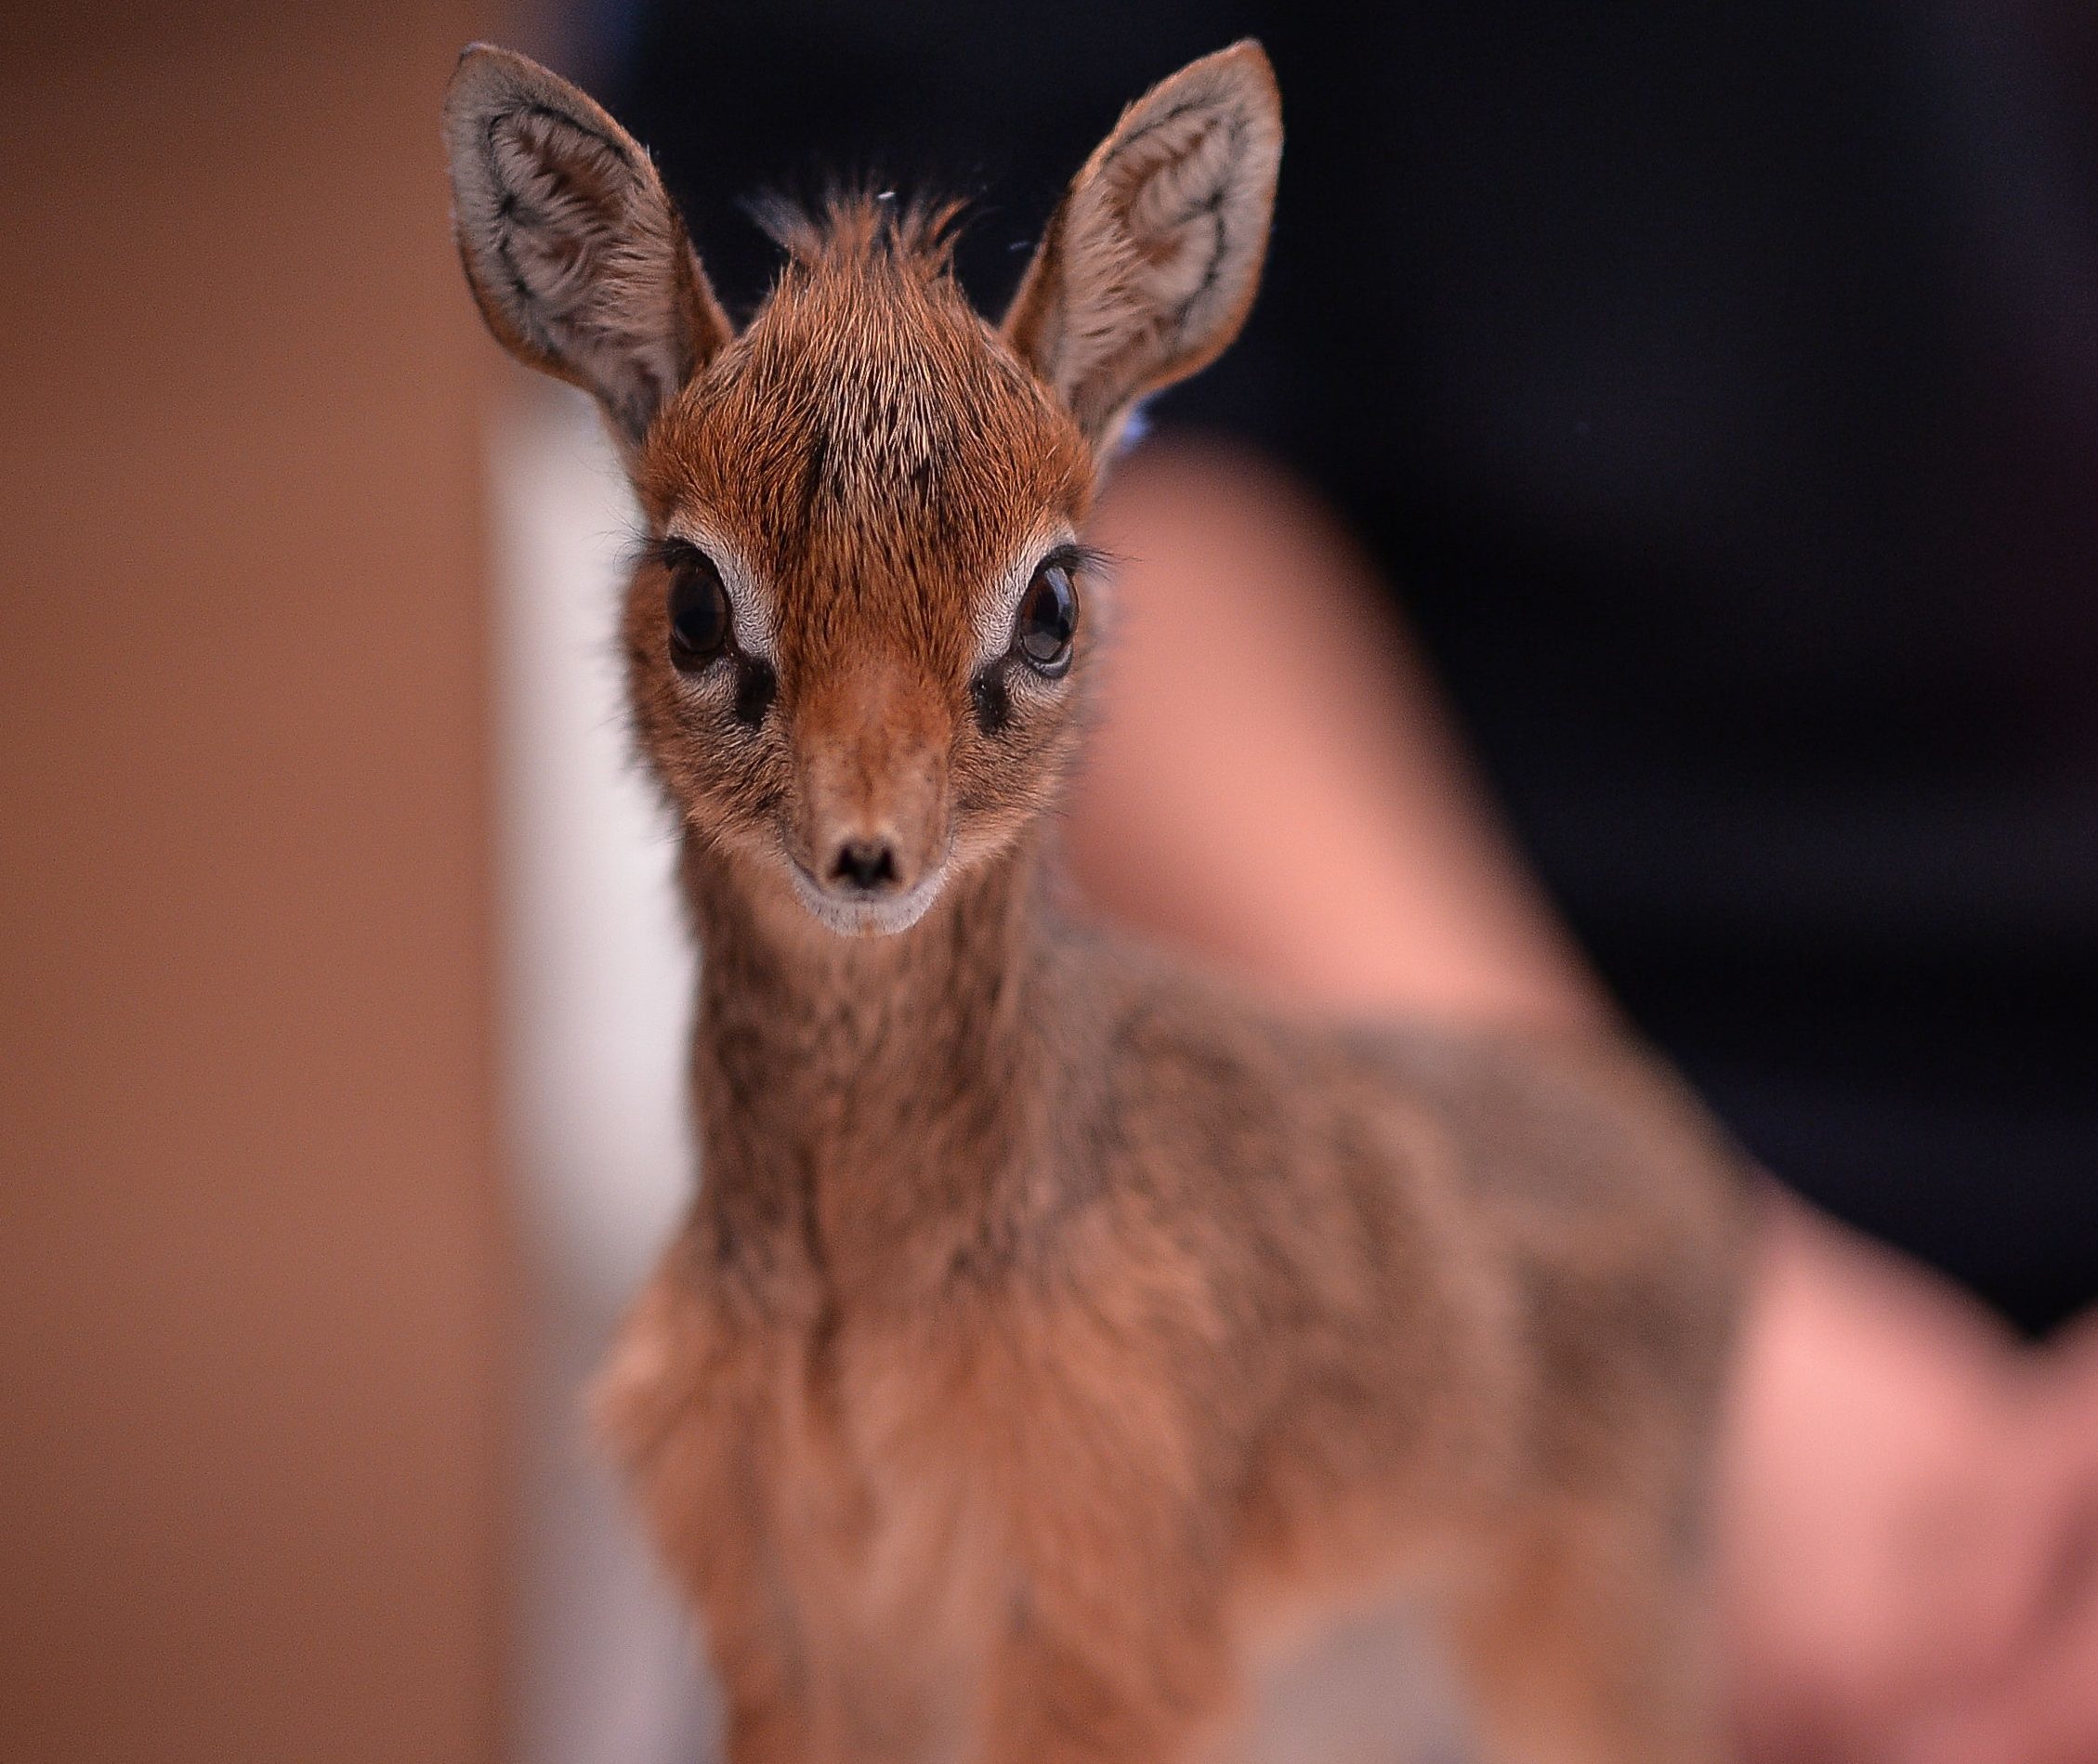 Tiny orphaned antelope which is being hand-reared by keepers at the zoo. (Steve Rawlins/Chester Zoo/PA Wire)